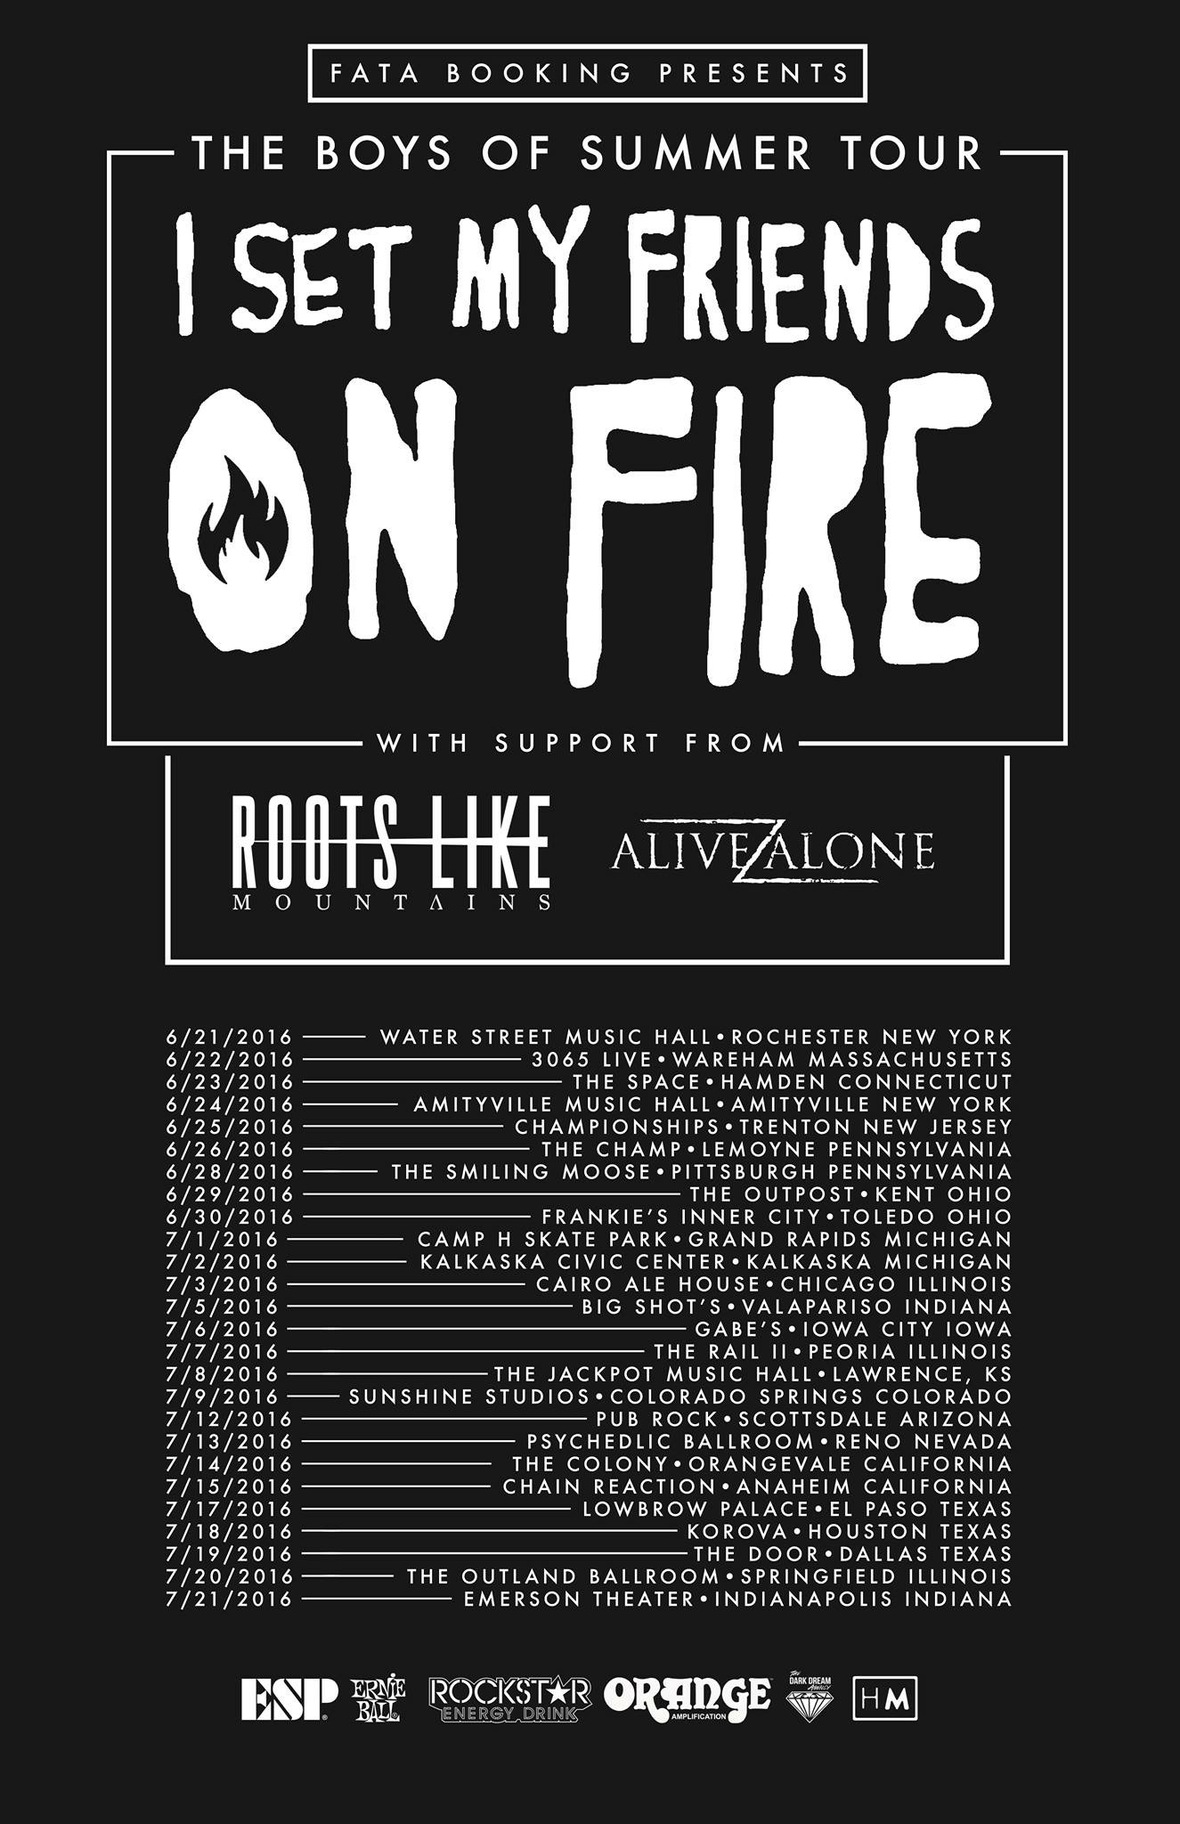 Roots Like Mountains Announce "The Boys Of Summer Tour" with I Set My